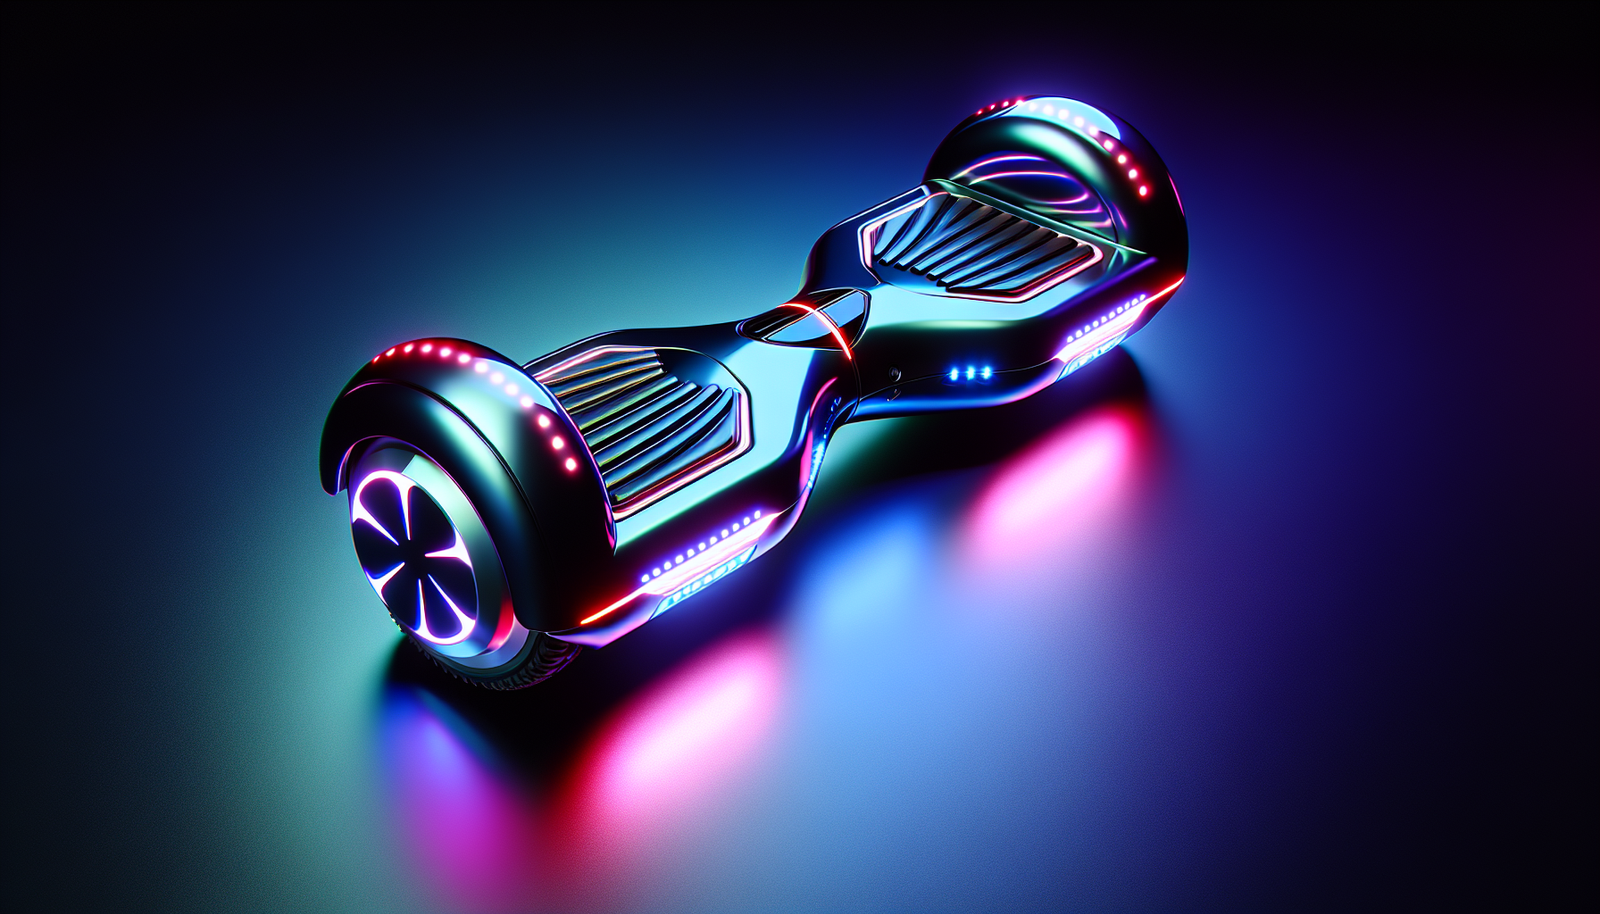 How Do I Troubleshoot Issues With The Hoverboards Display And Controls?